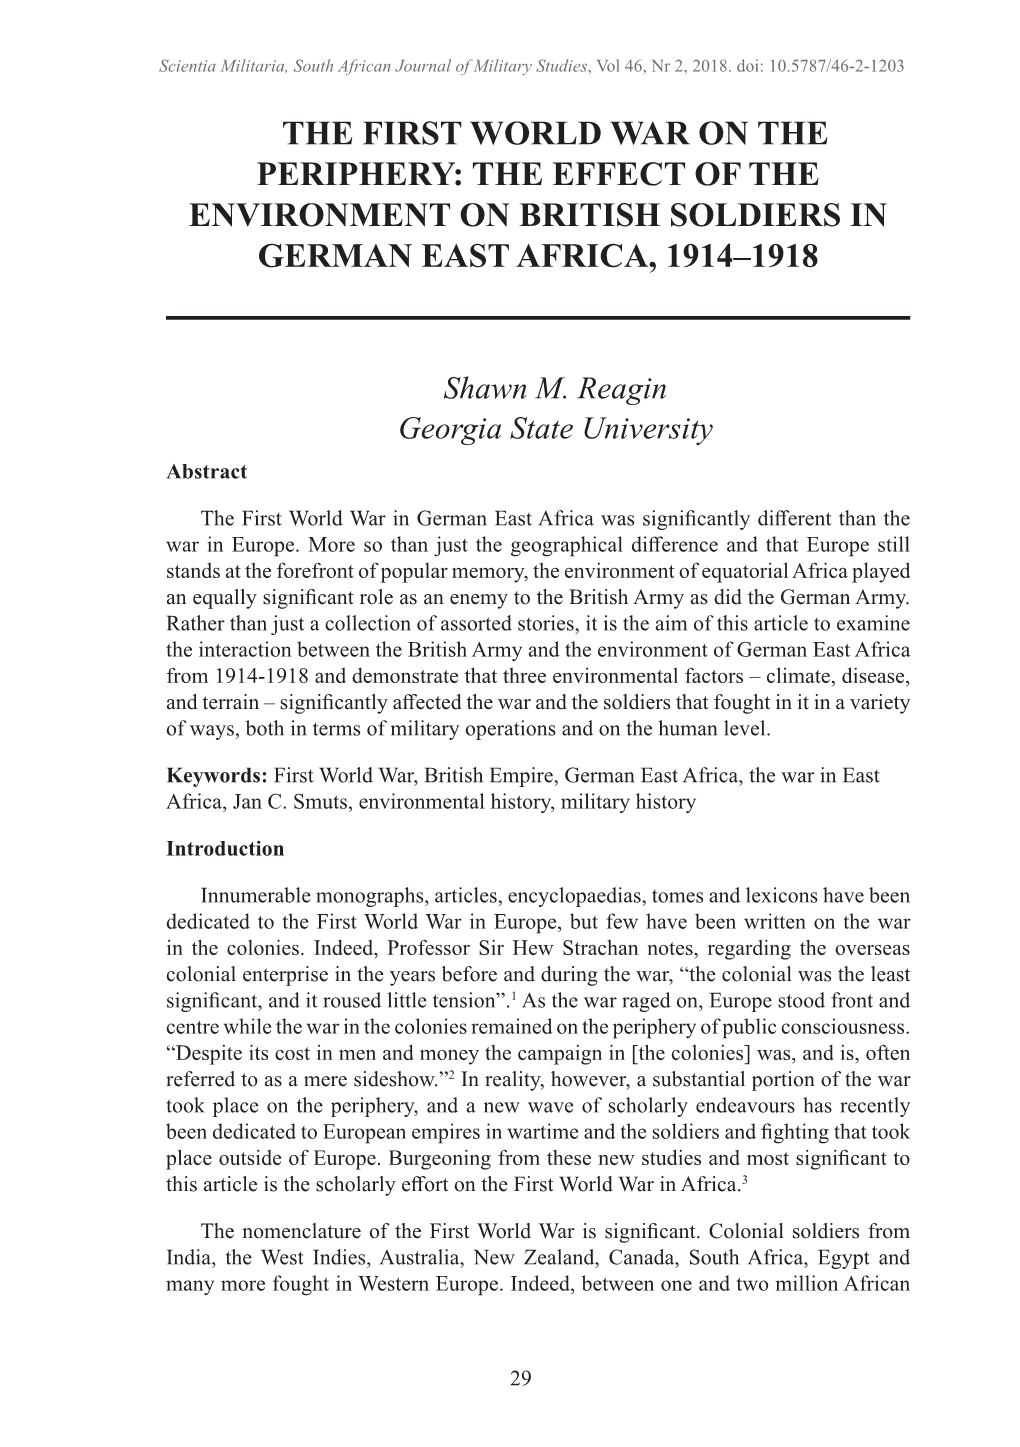 The First World War on the Periphery: the Effect of the Environment on British Soldiers in German East Africa, 1914–1918